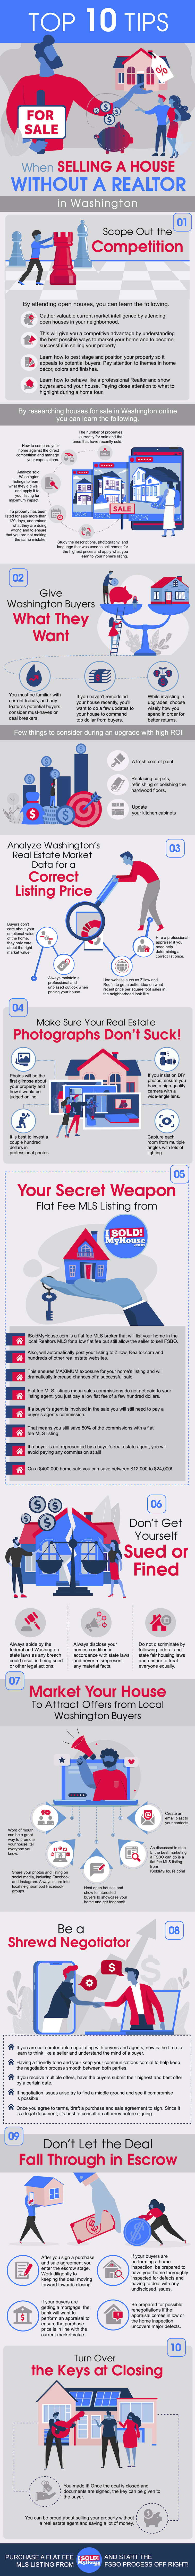 infographic of the 10 steps to sell a house in washington without an agent